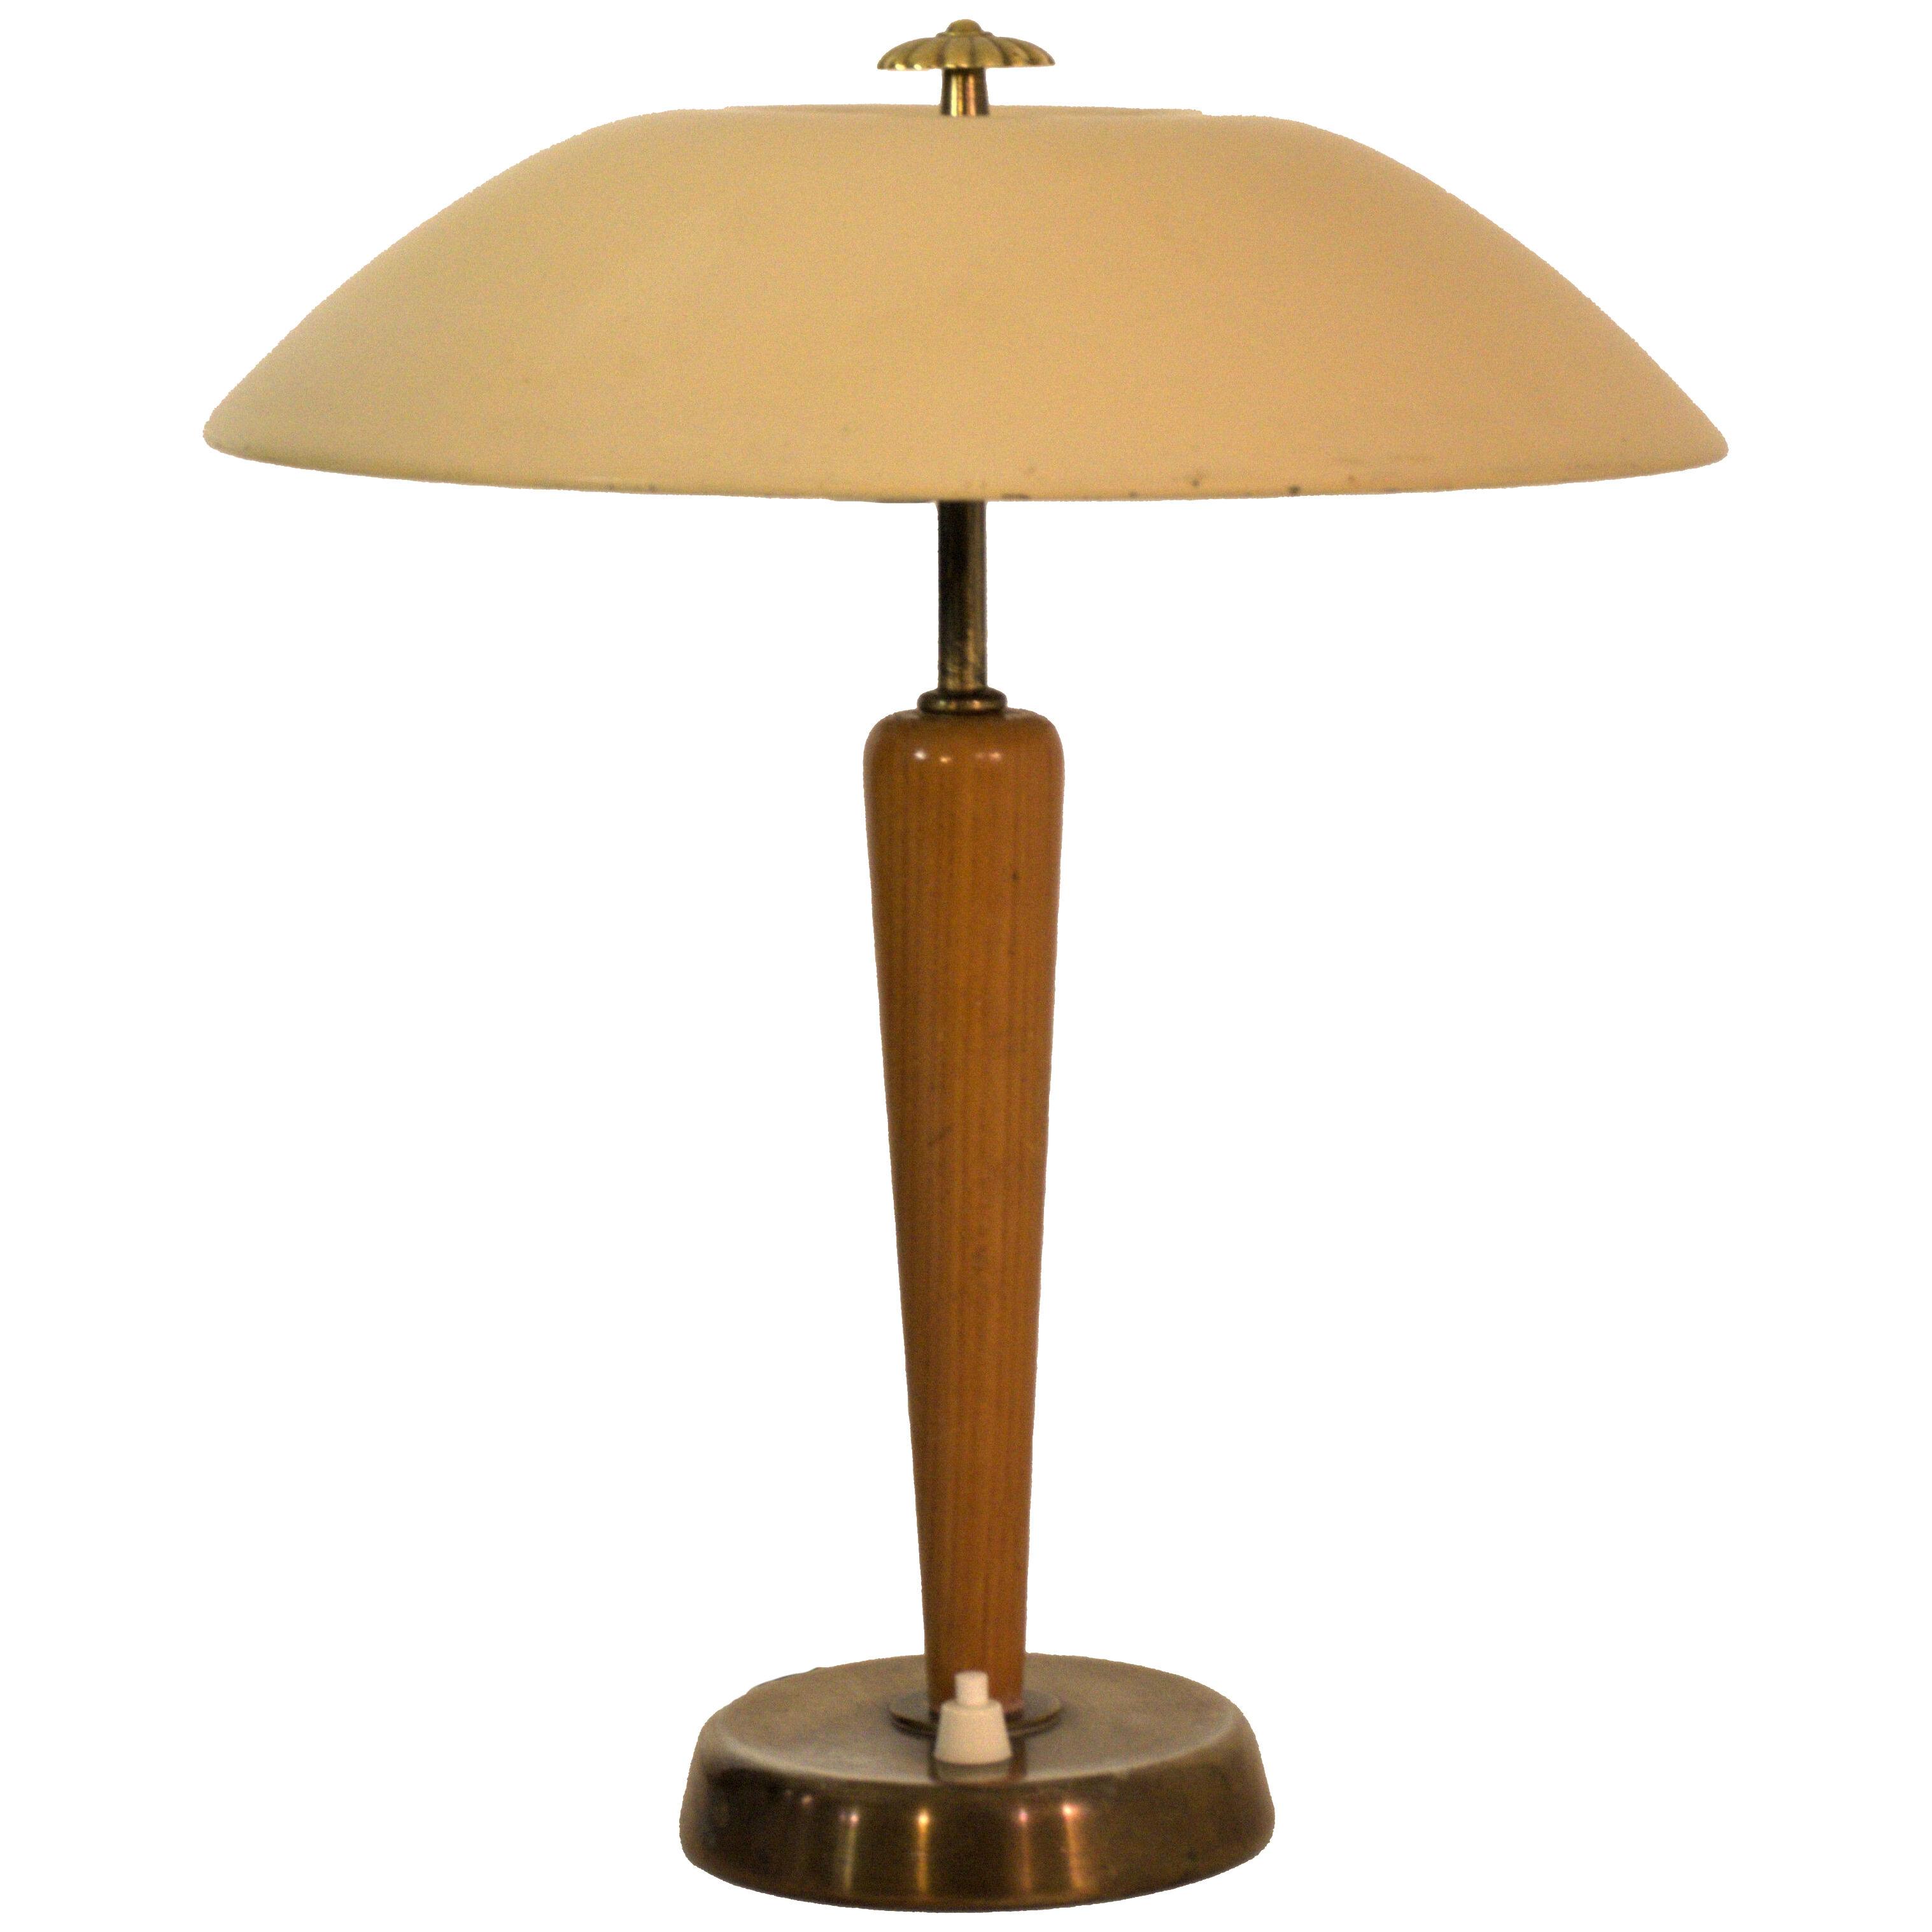 Rare Swedish Grace Period Brass and Oakwood Table Lamp by Böhlmarks, late 1920´s